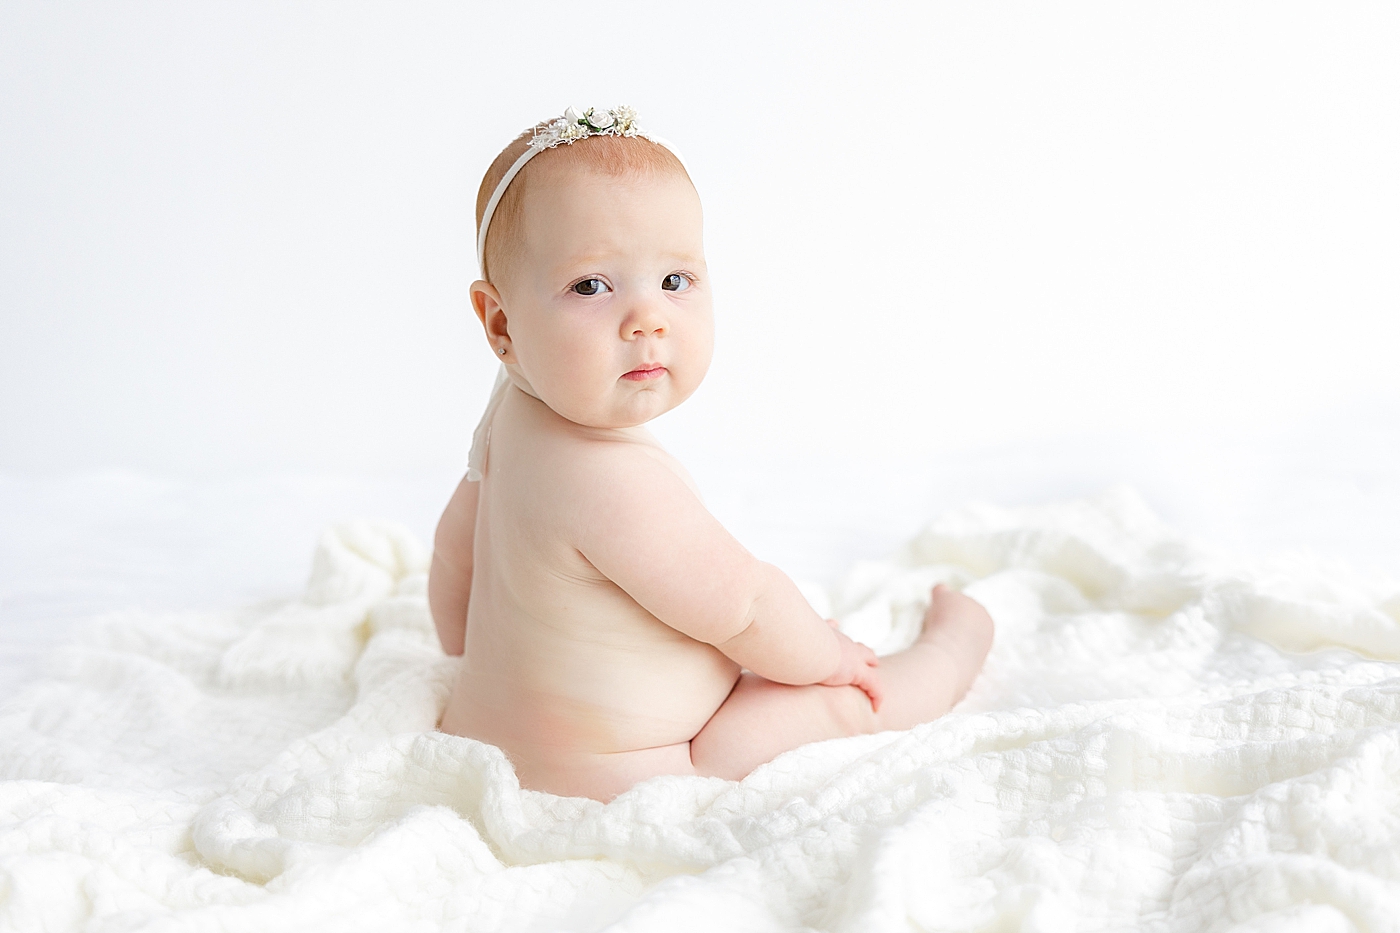 Baby girl wearing a headband sitting on a white blanket | Image by Sana Ahmed Photography